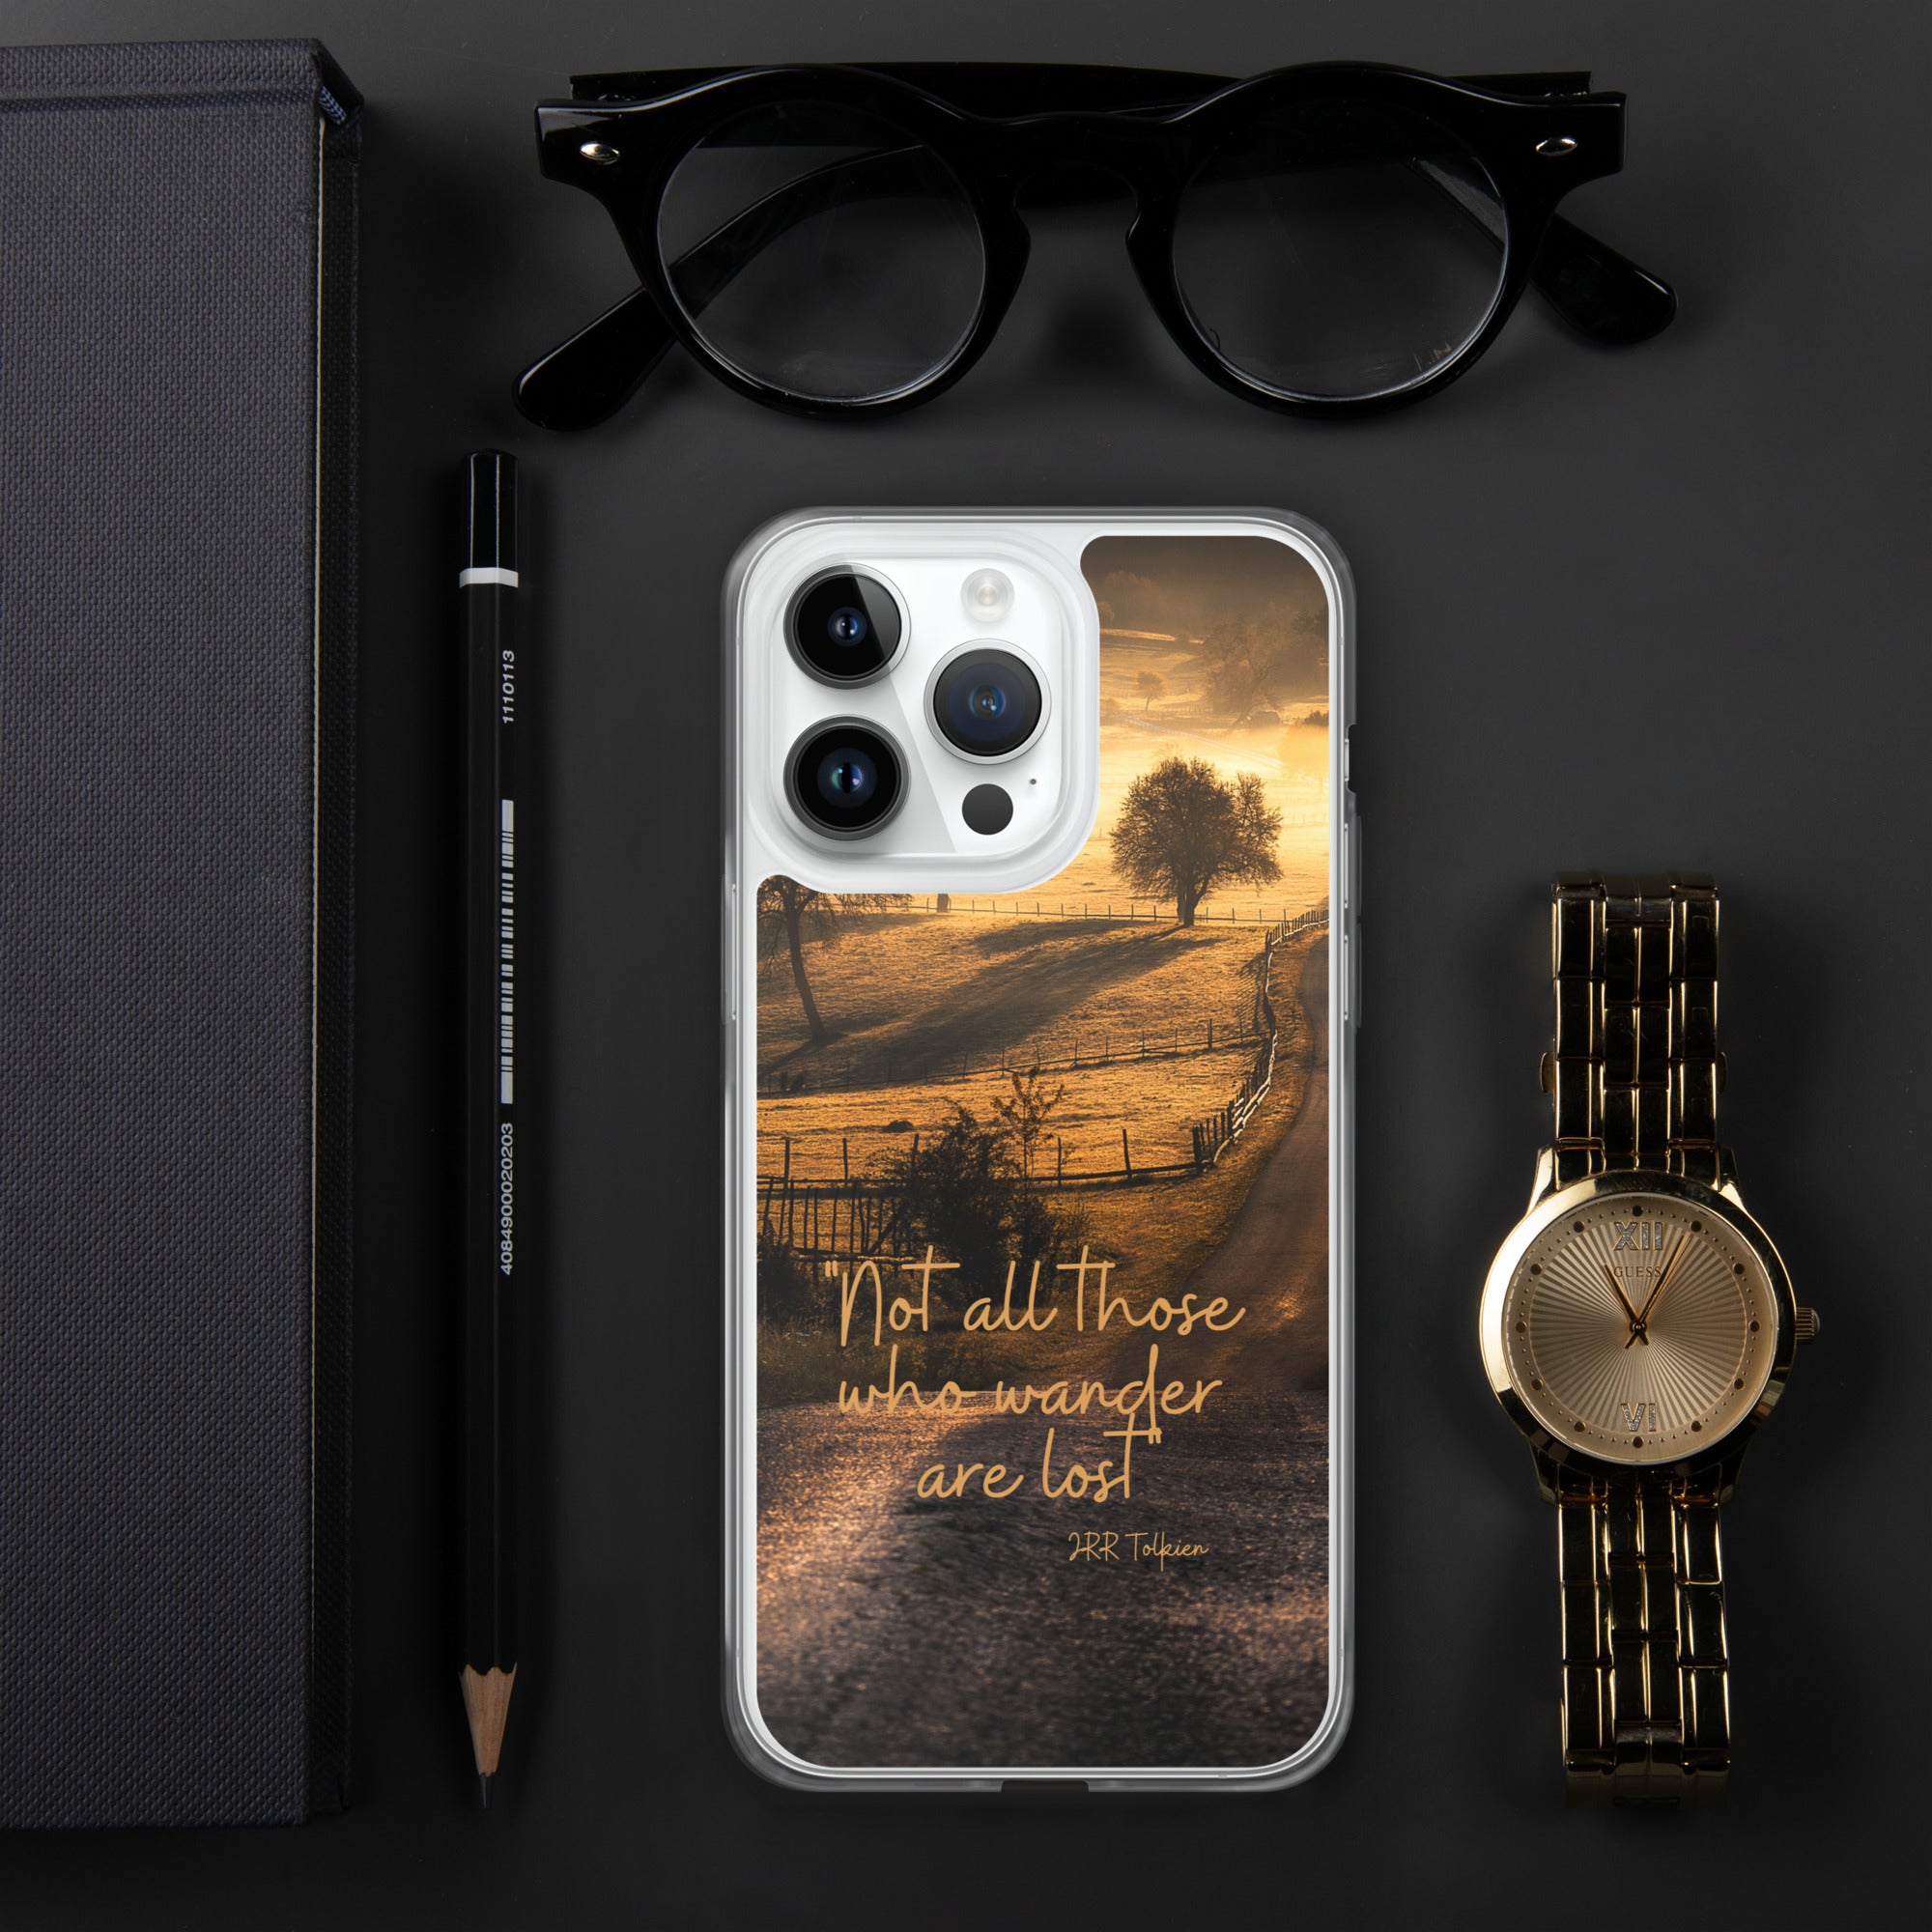 Not All Those Who Wander Are Lost (JRR Tolkien) - iPhone Case